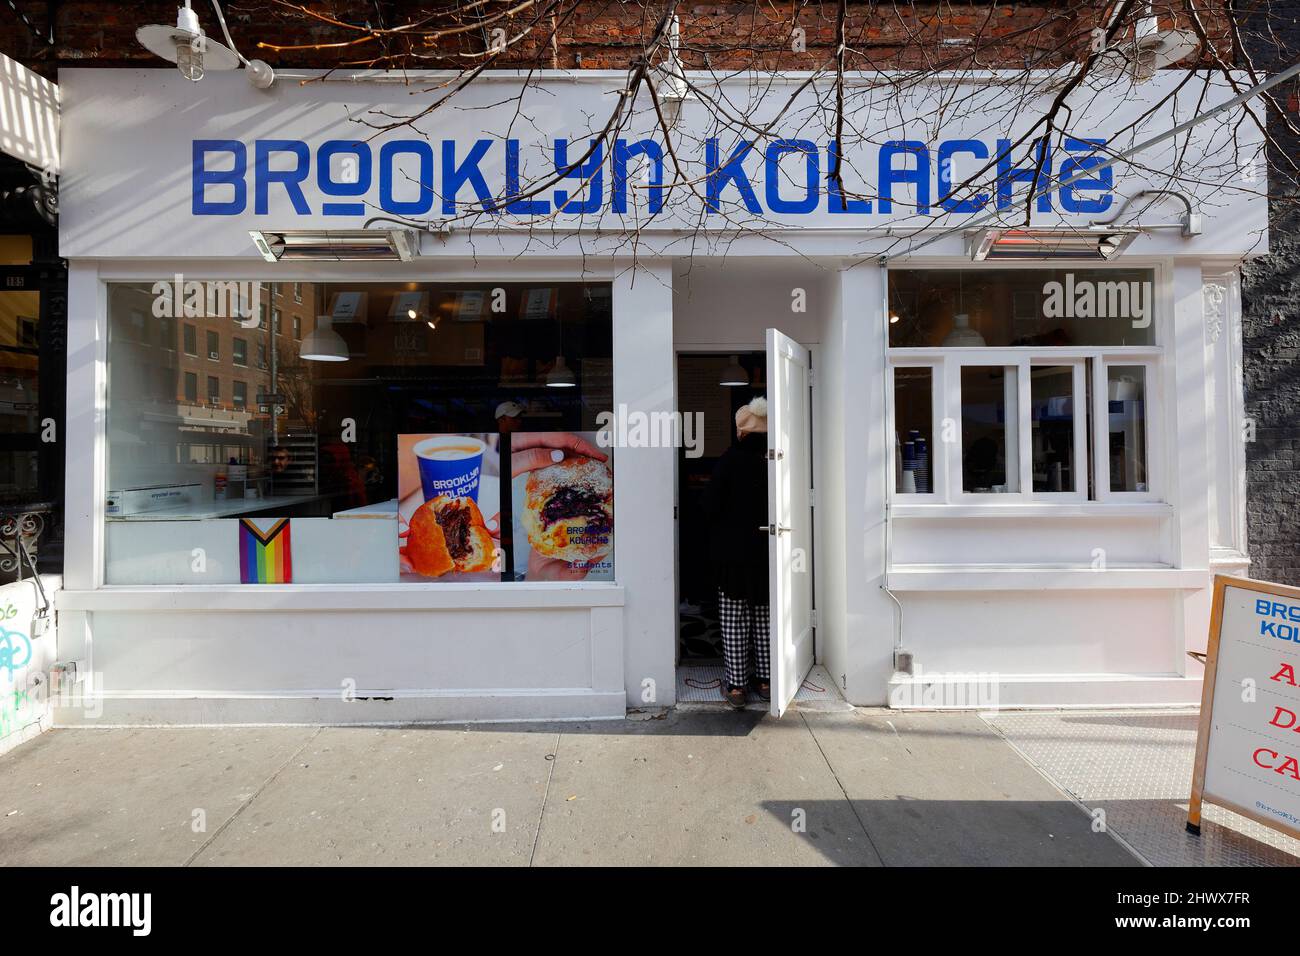 [historical storefront] Brooklyn Kolache, 185 Bleecker St, New York, NYC storefront photo of a Texas-style kolaches bakery in the Greenwich Village Stock Photo